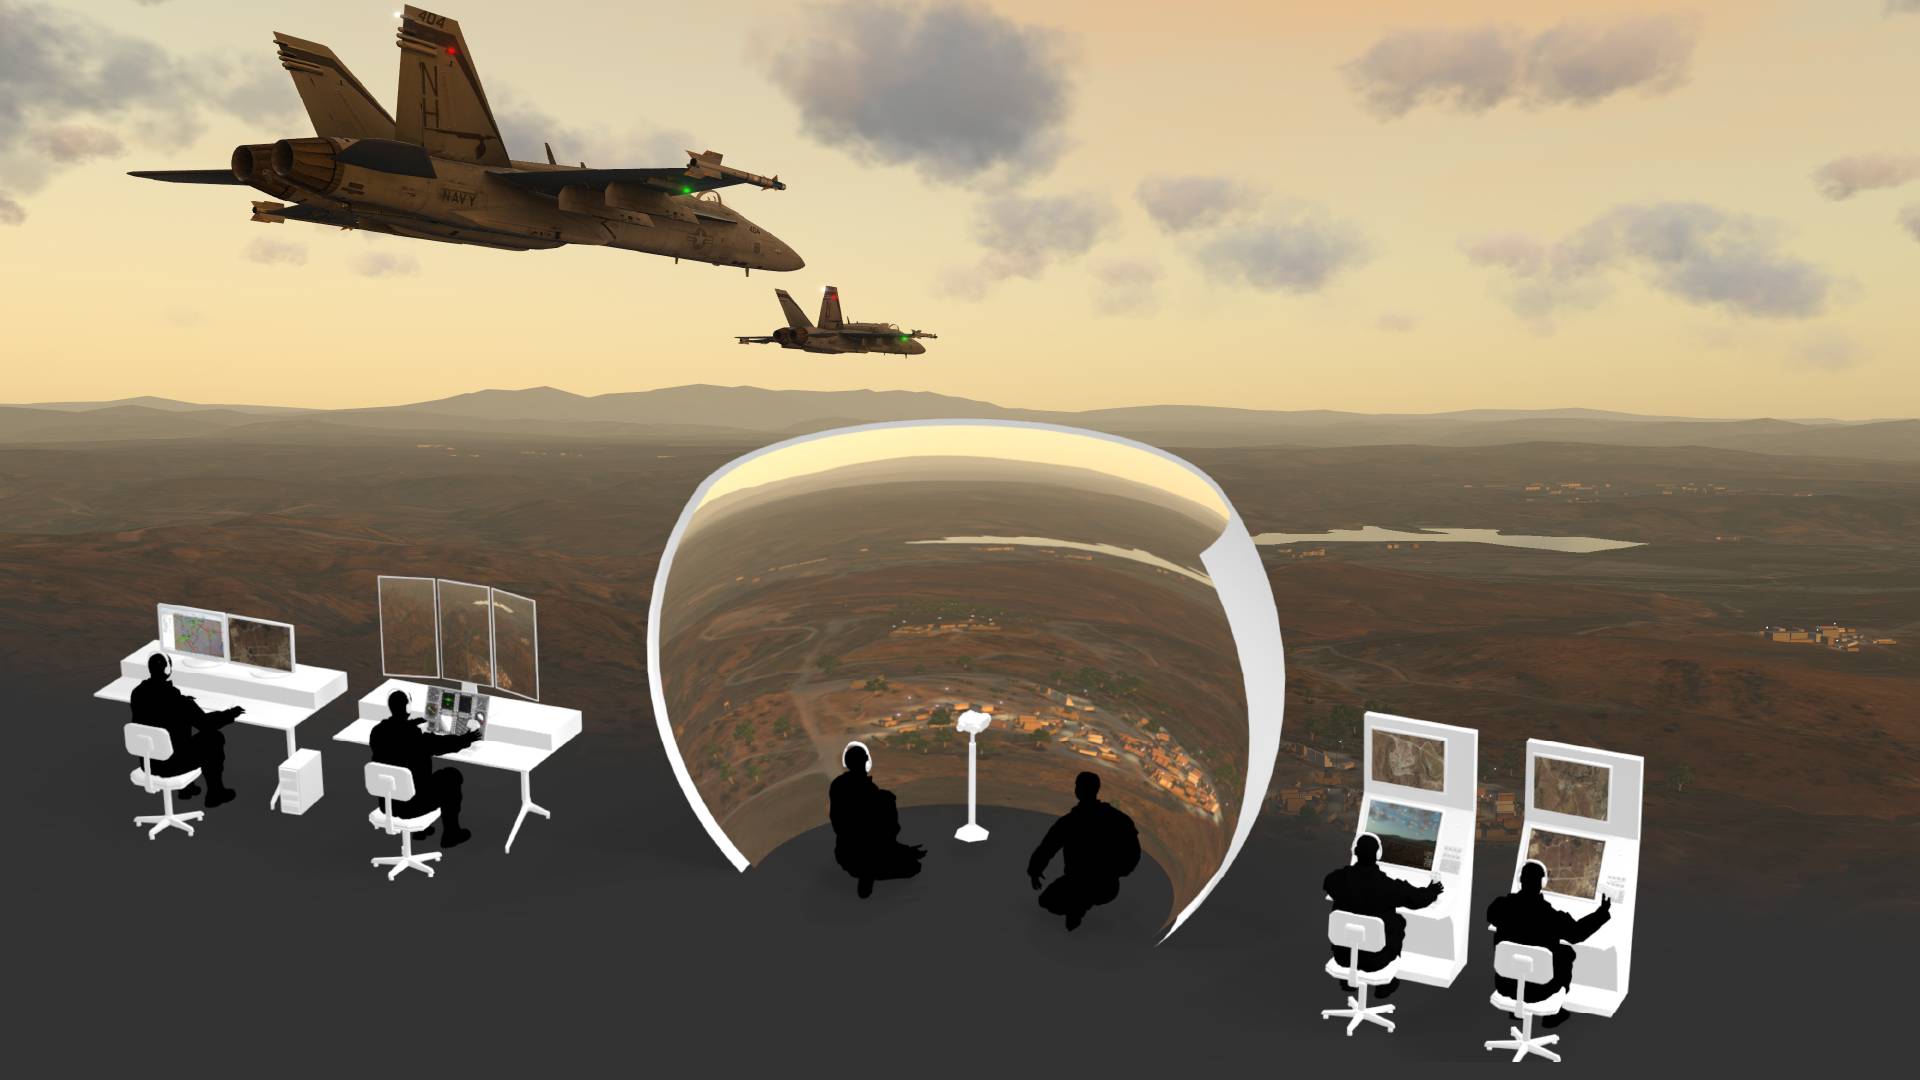 Why is scenario-based training important for military aviation?